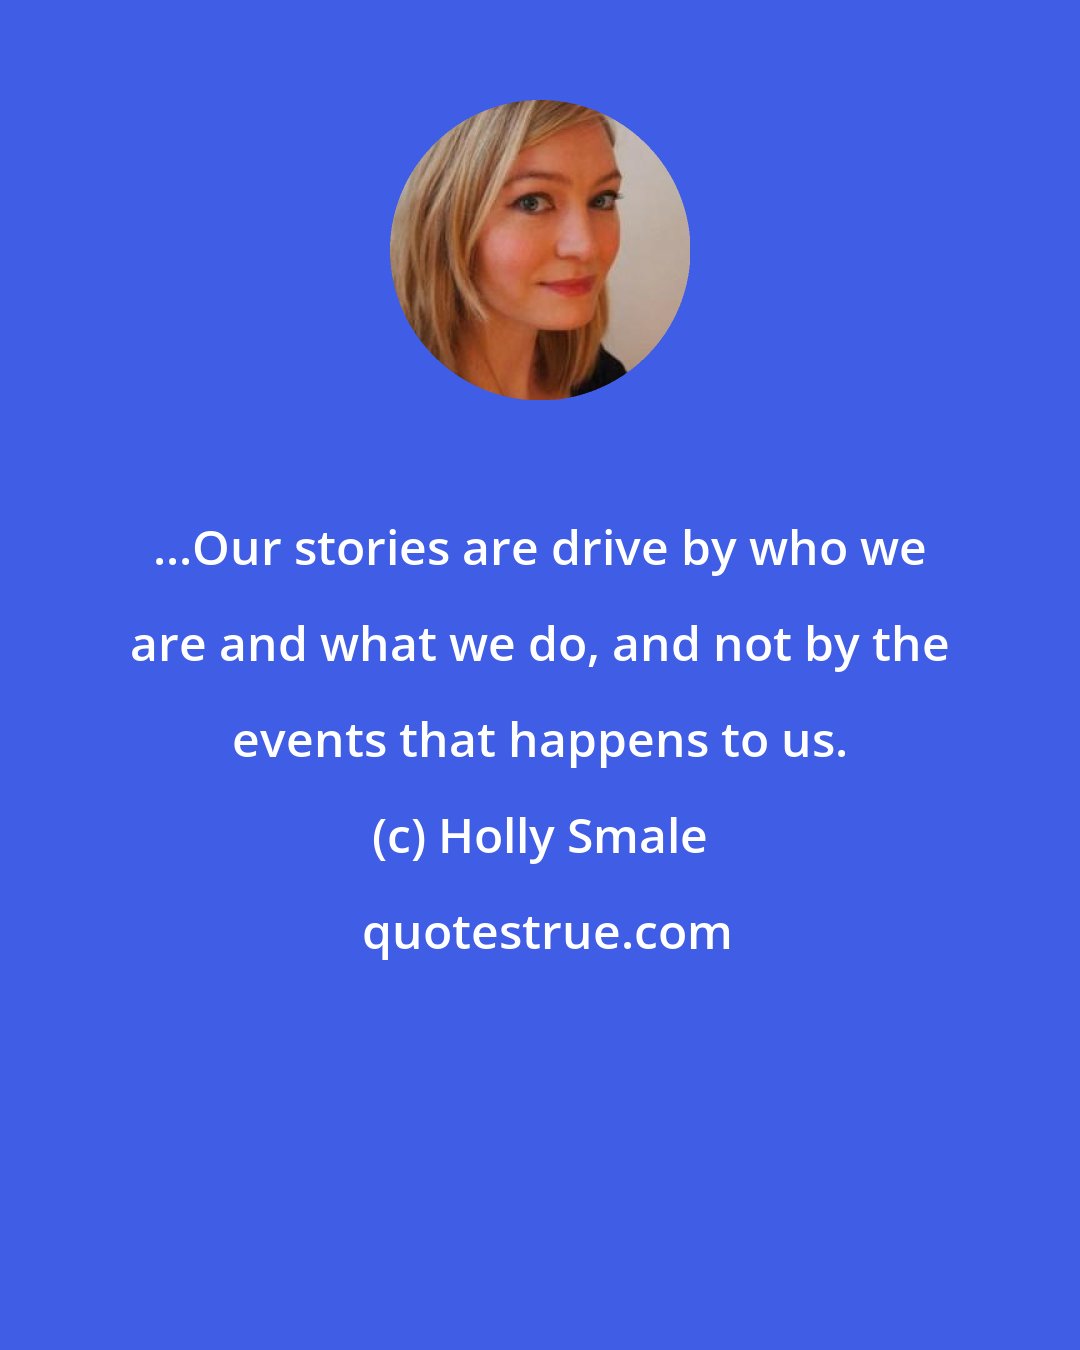 Holly Smale: ...Our stories are drive by who we are and what we do, and not by the events that happens to us.